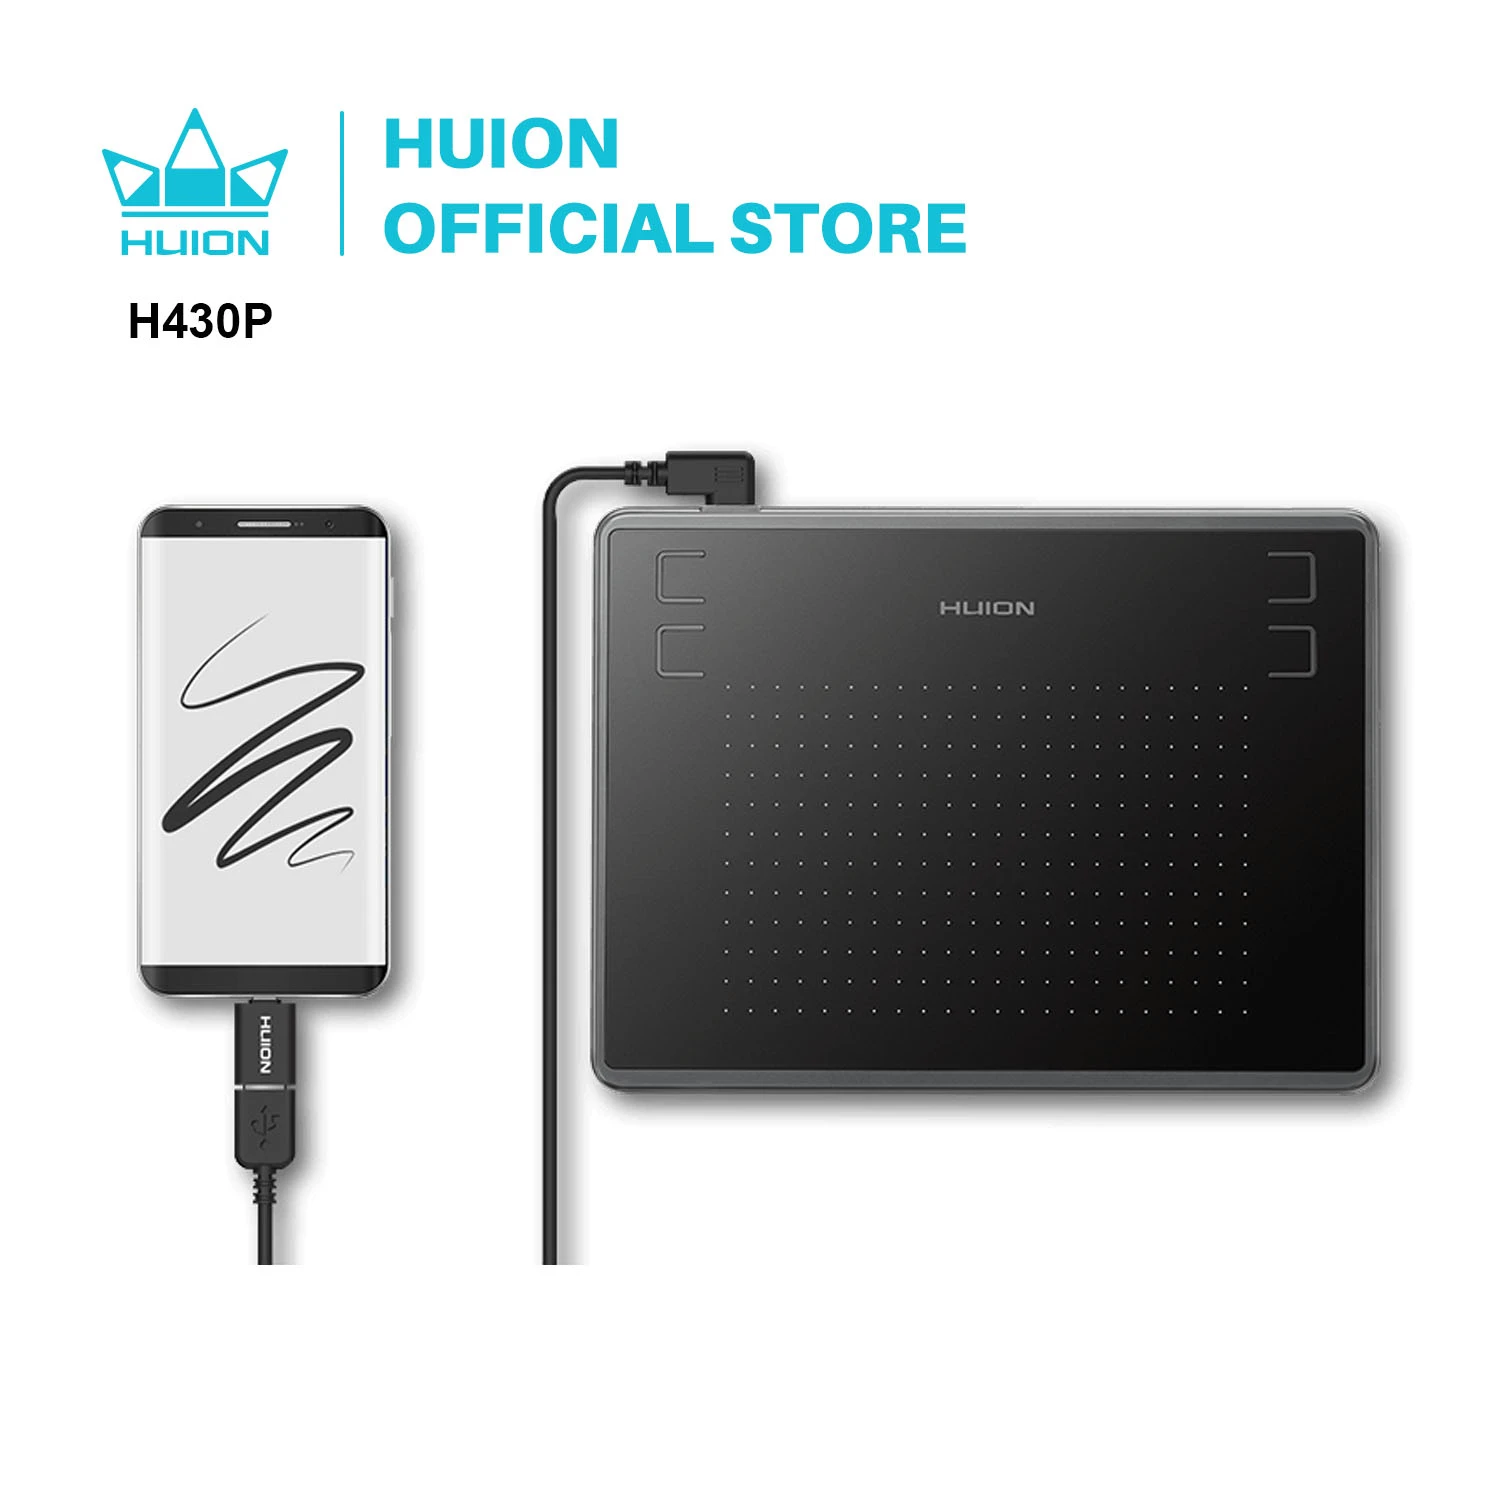 HUION H430P Graphics Drawing Digital Tablets Signature Pen Tablet OSU Game Tablet with Battery-Free Stylus Pen